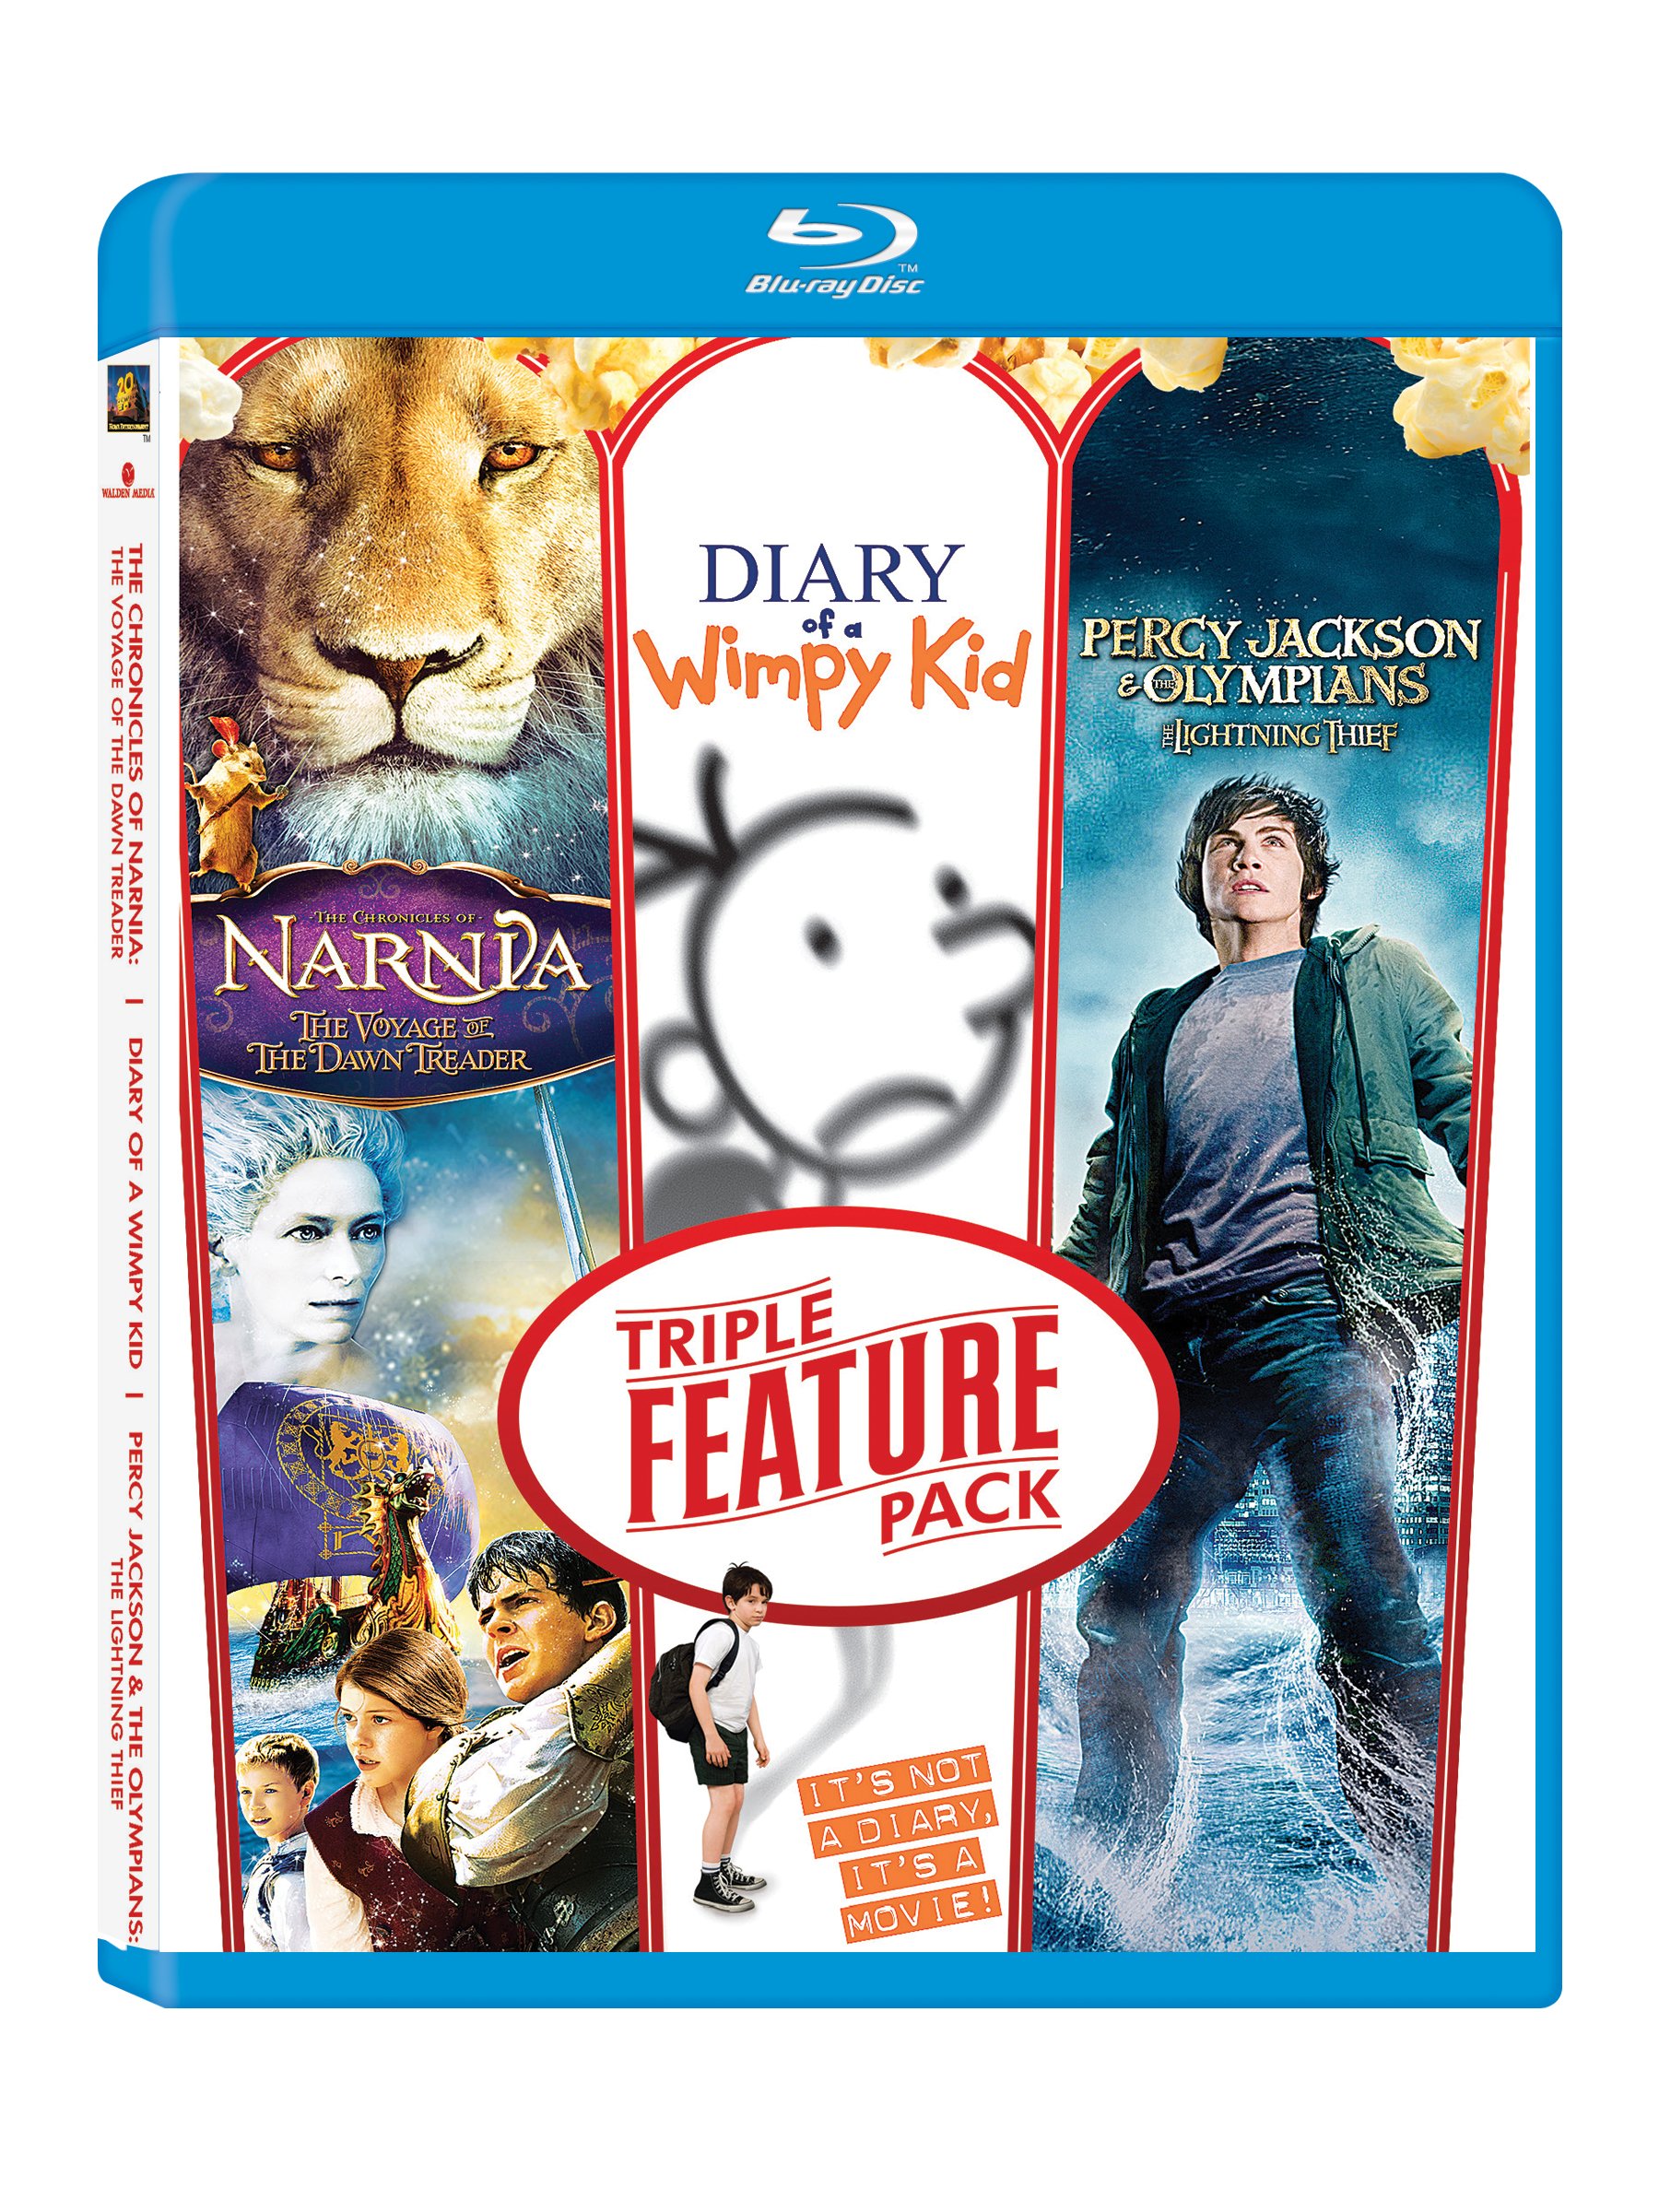 triple-feature-collection-the-voyage-of-the-dawn-treader-diary-of-a-wimpy-kid-percy-jackson-the-olympians-the-lightning-thief-3-disc-box-set